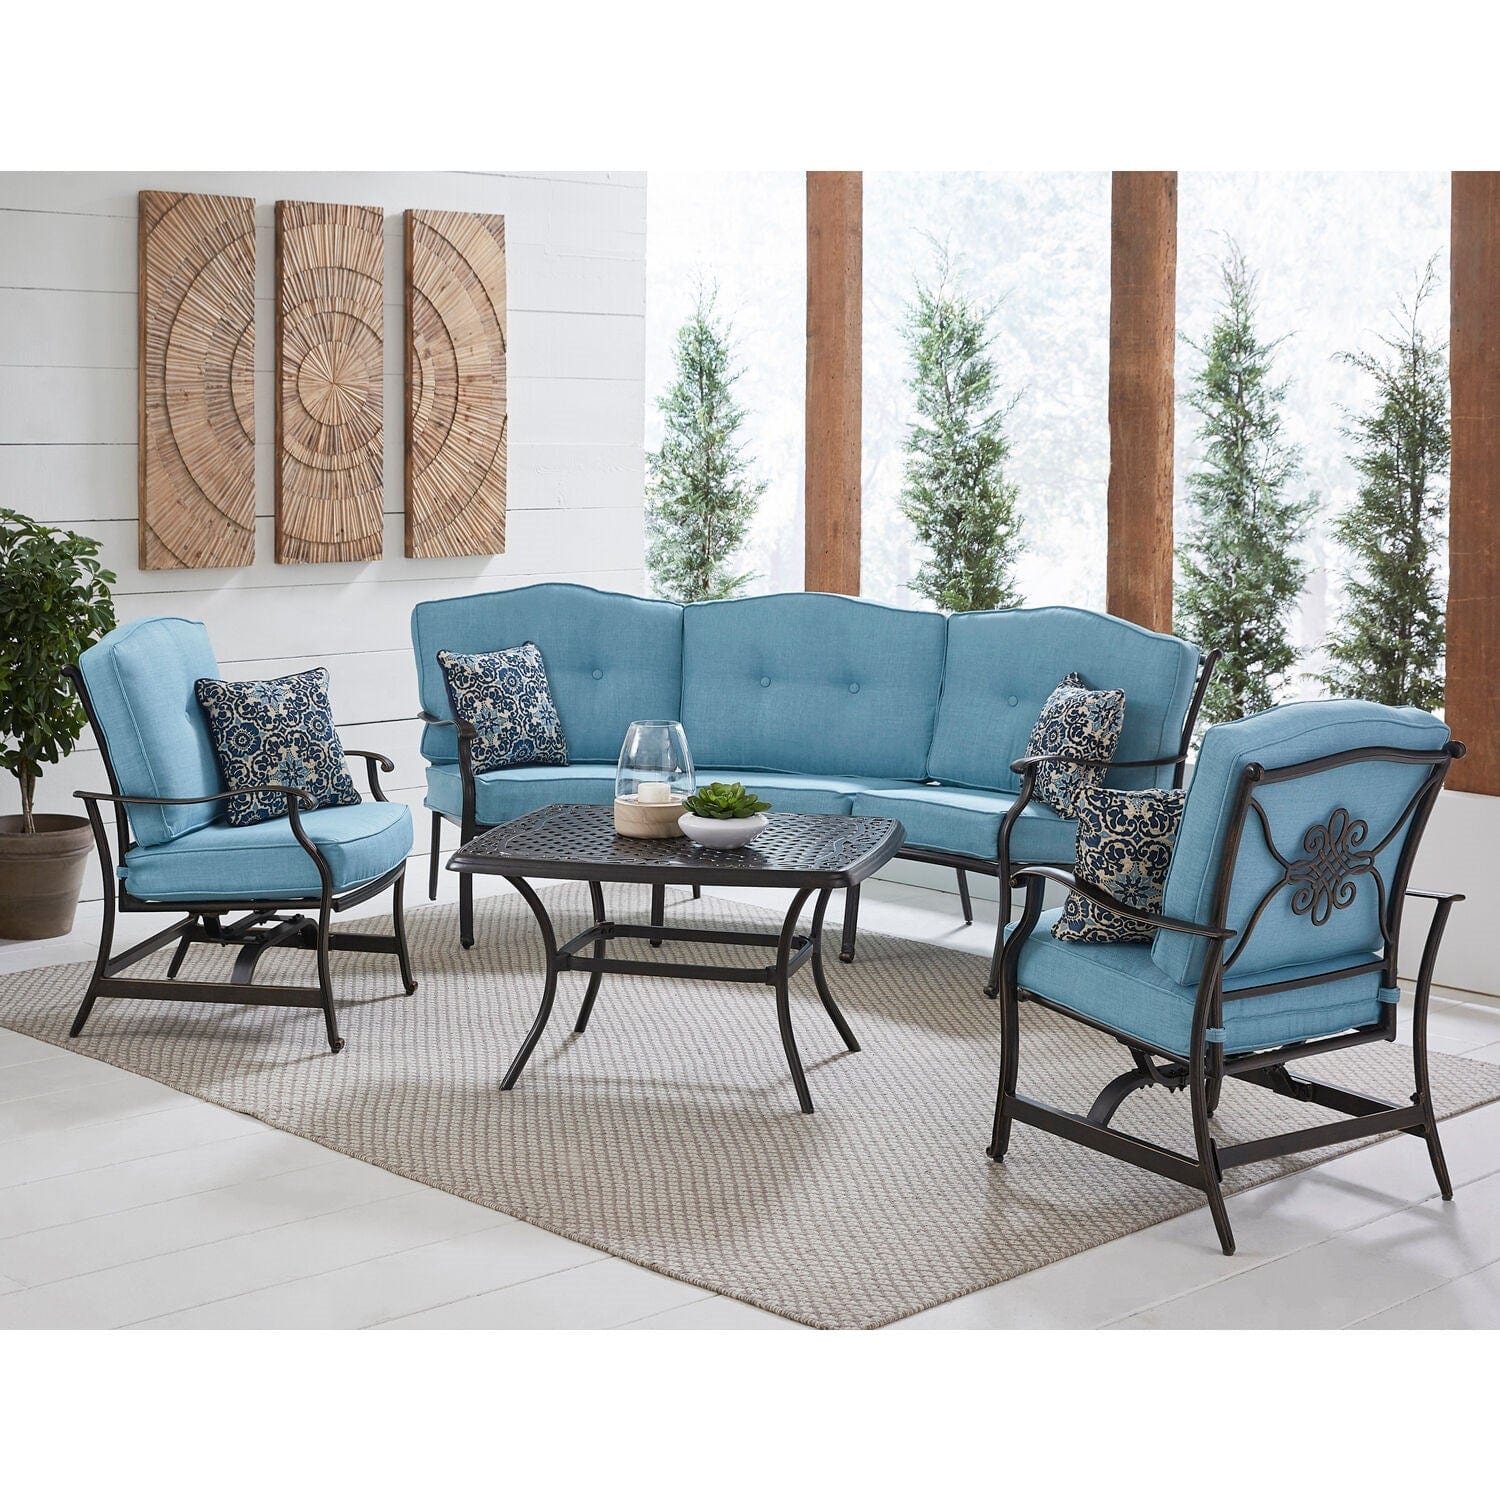 Hanover Conversation Set Hanover - Traditions 4-Piece Aluminum Patio Conversation Set with Blue Cushions, Cast-Top Coffee Table, Sofa and 2-Rockers